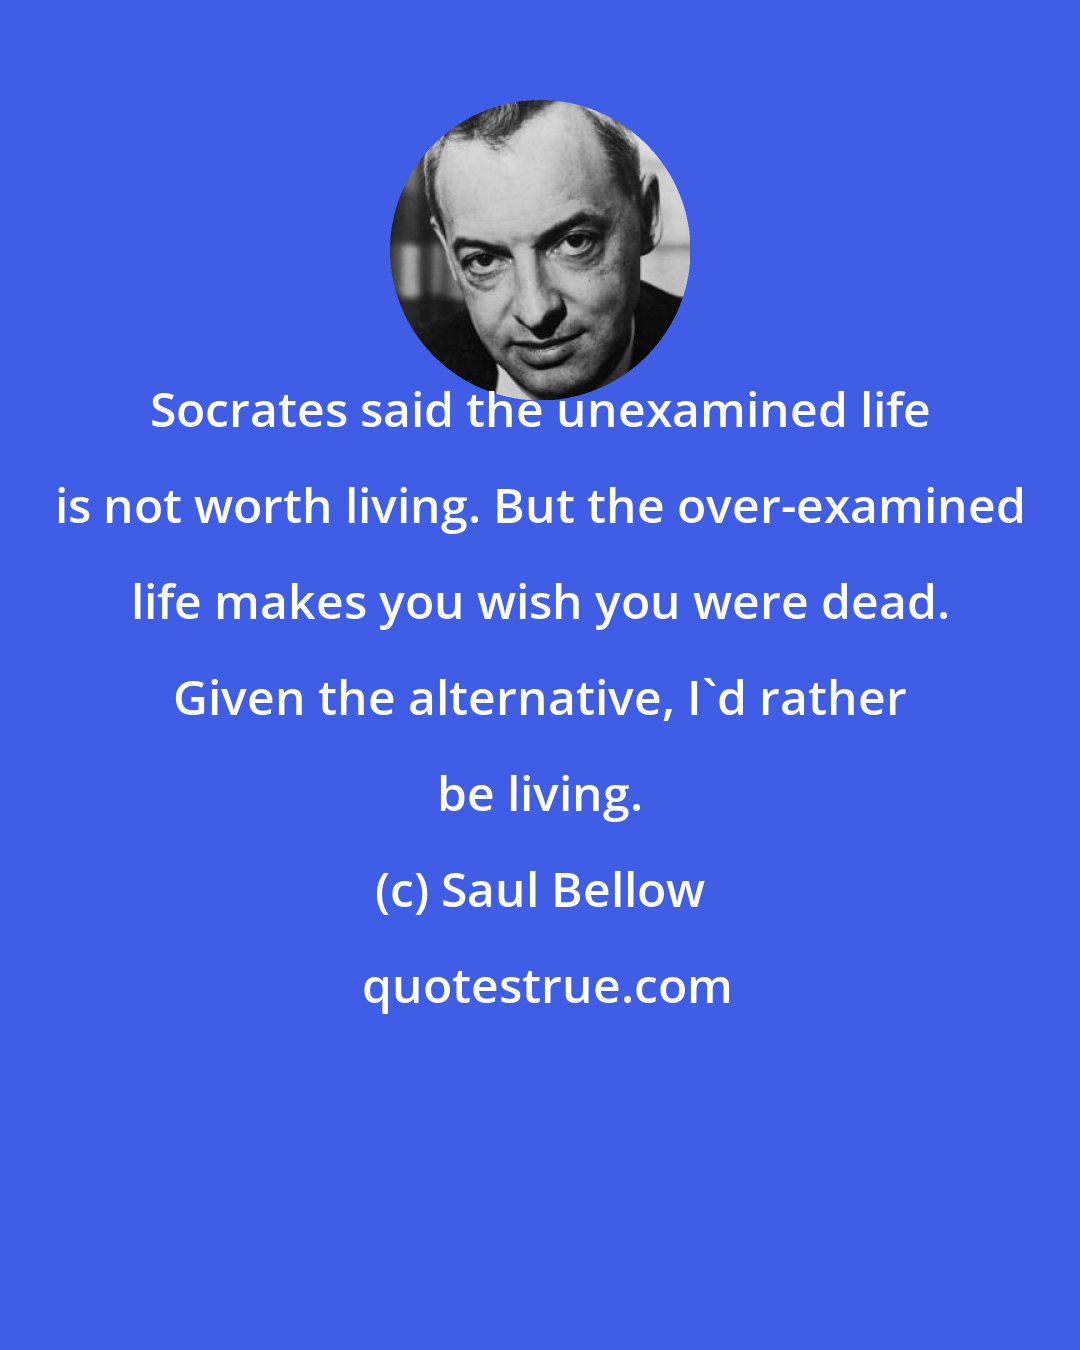 Saul Bellow: Socrates said the unexamined life is not worth living. But the over-examined life makes you wish you were dead. Given the alternative, I'd rather be living.